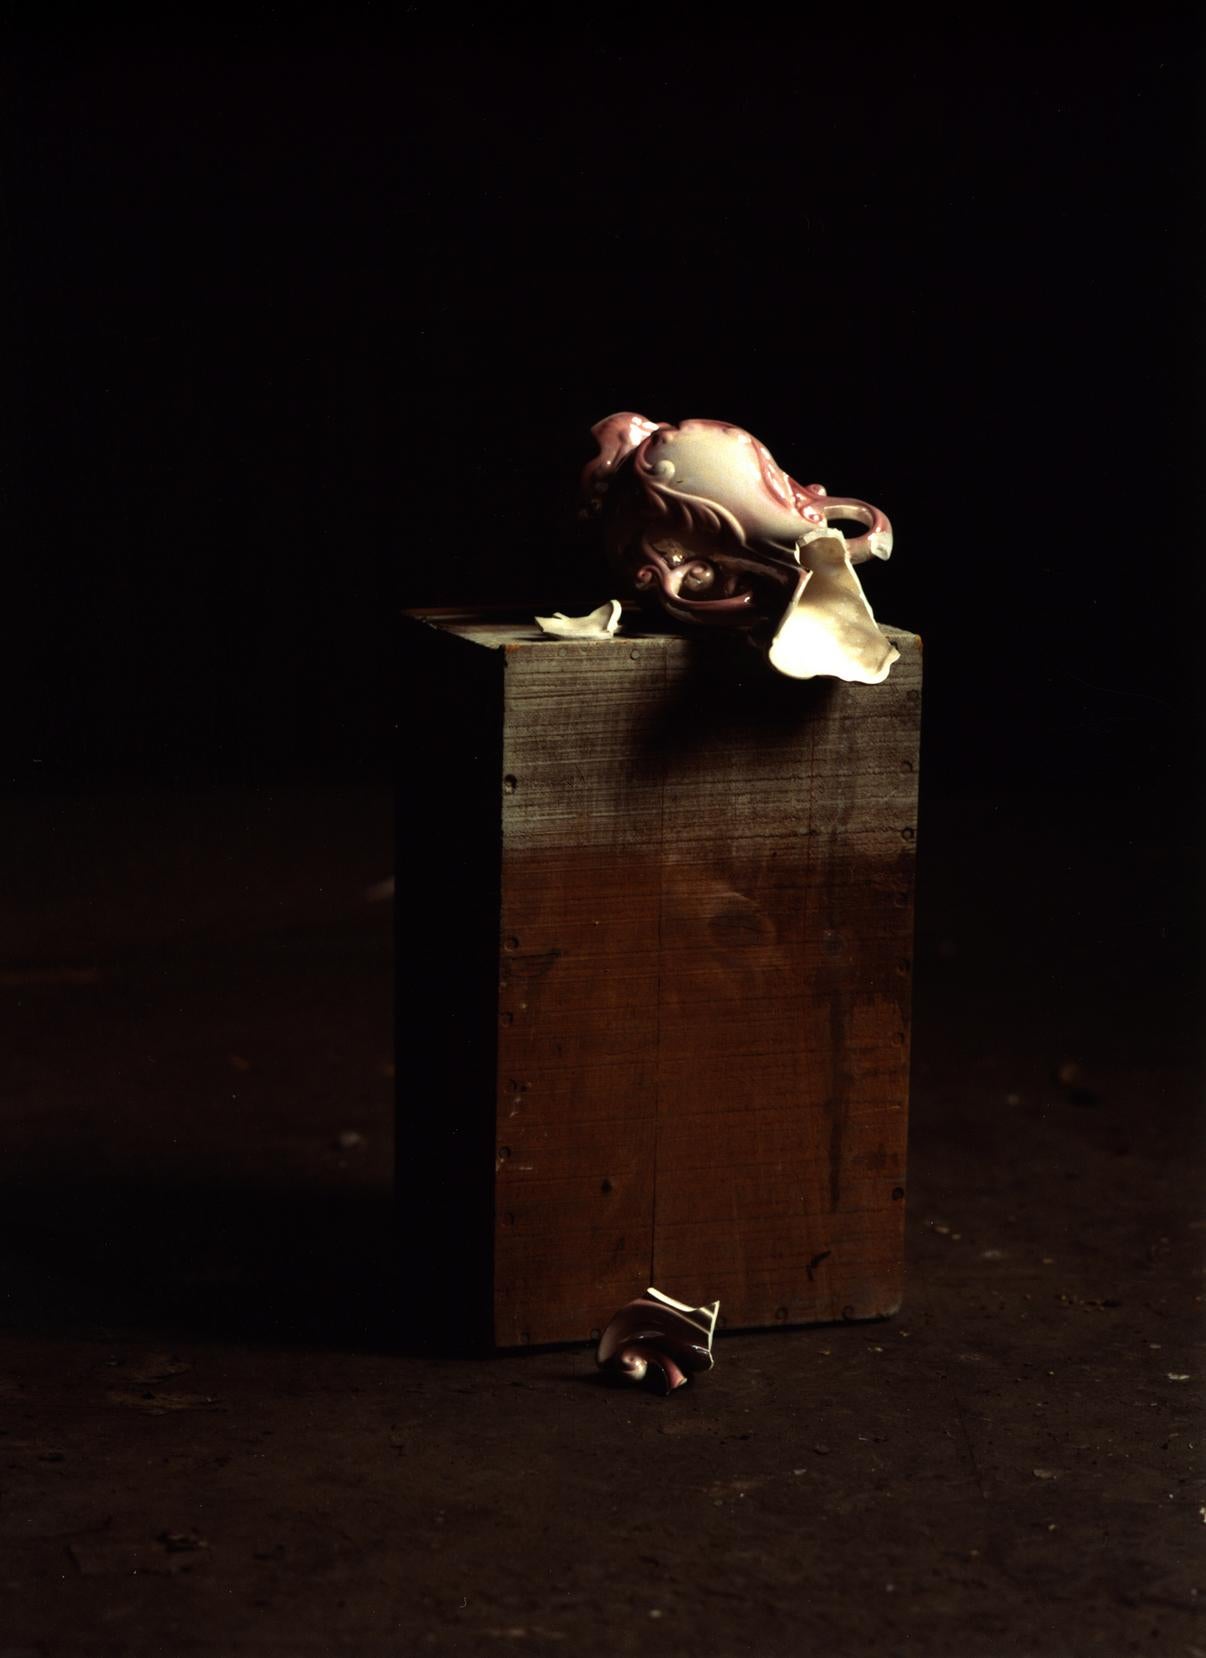 Michael James O’Brien Still-Life Photograph - Still life with a Broken Vase, n.d. Limited edition color photograph